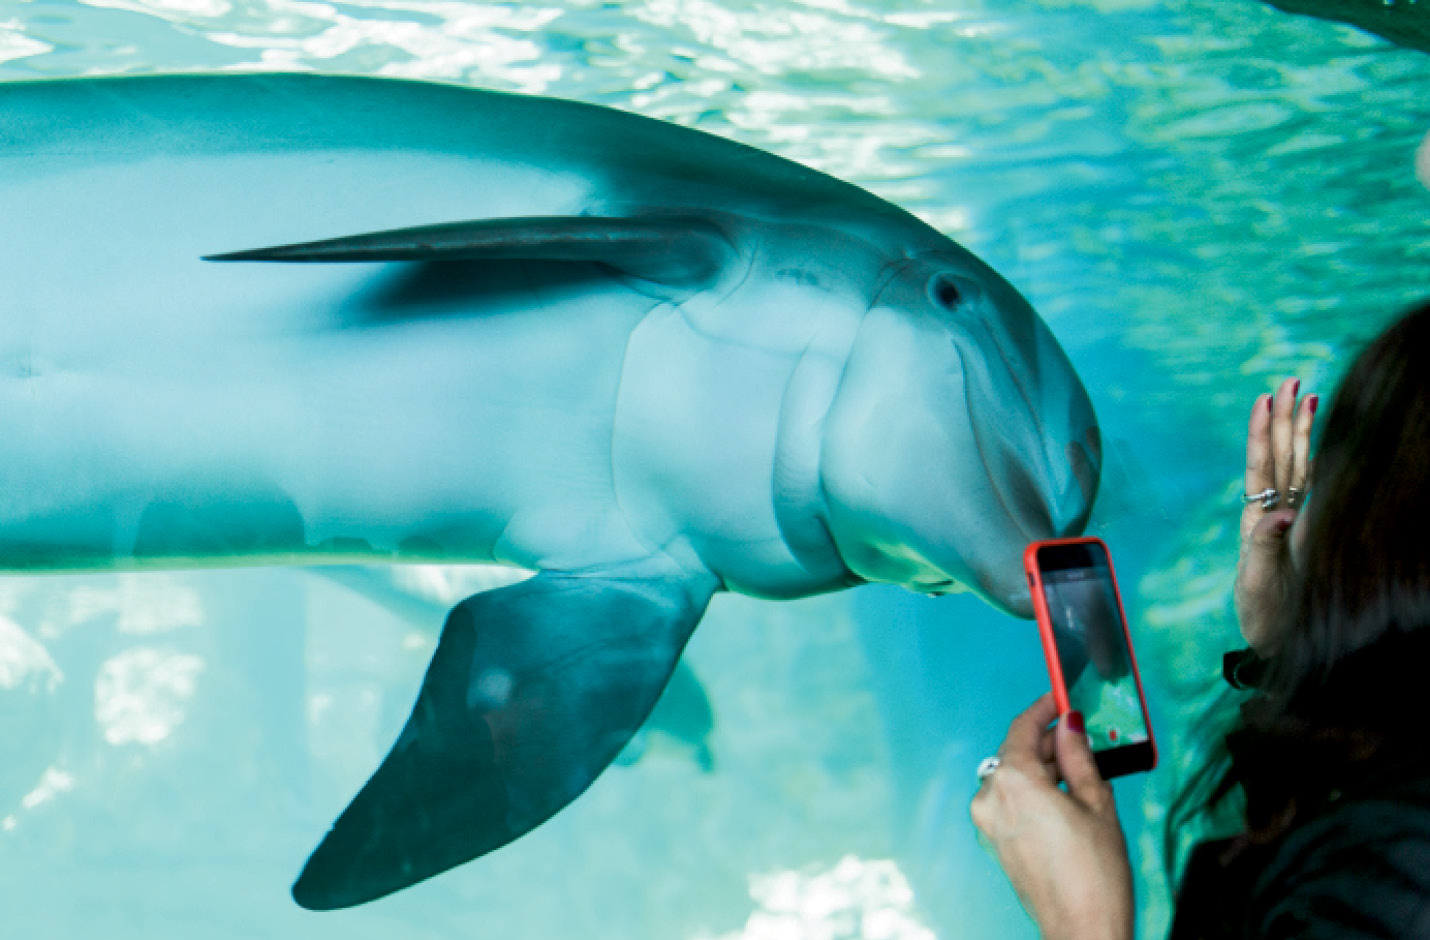 Captivating &amp; Captive: The Marine Mammal Protection Act prohibits the “take” of wild marine mammals, including dolphins, without a permit. Some animals born in captivity remain in controlled environments, such as at Marineland, a former amusement park in Florida that’s now part of the Georgia Aquarium dolphin conservation program.